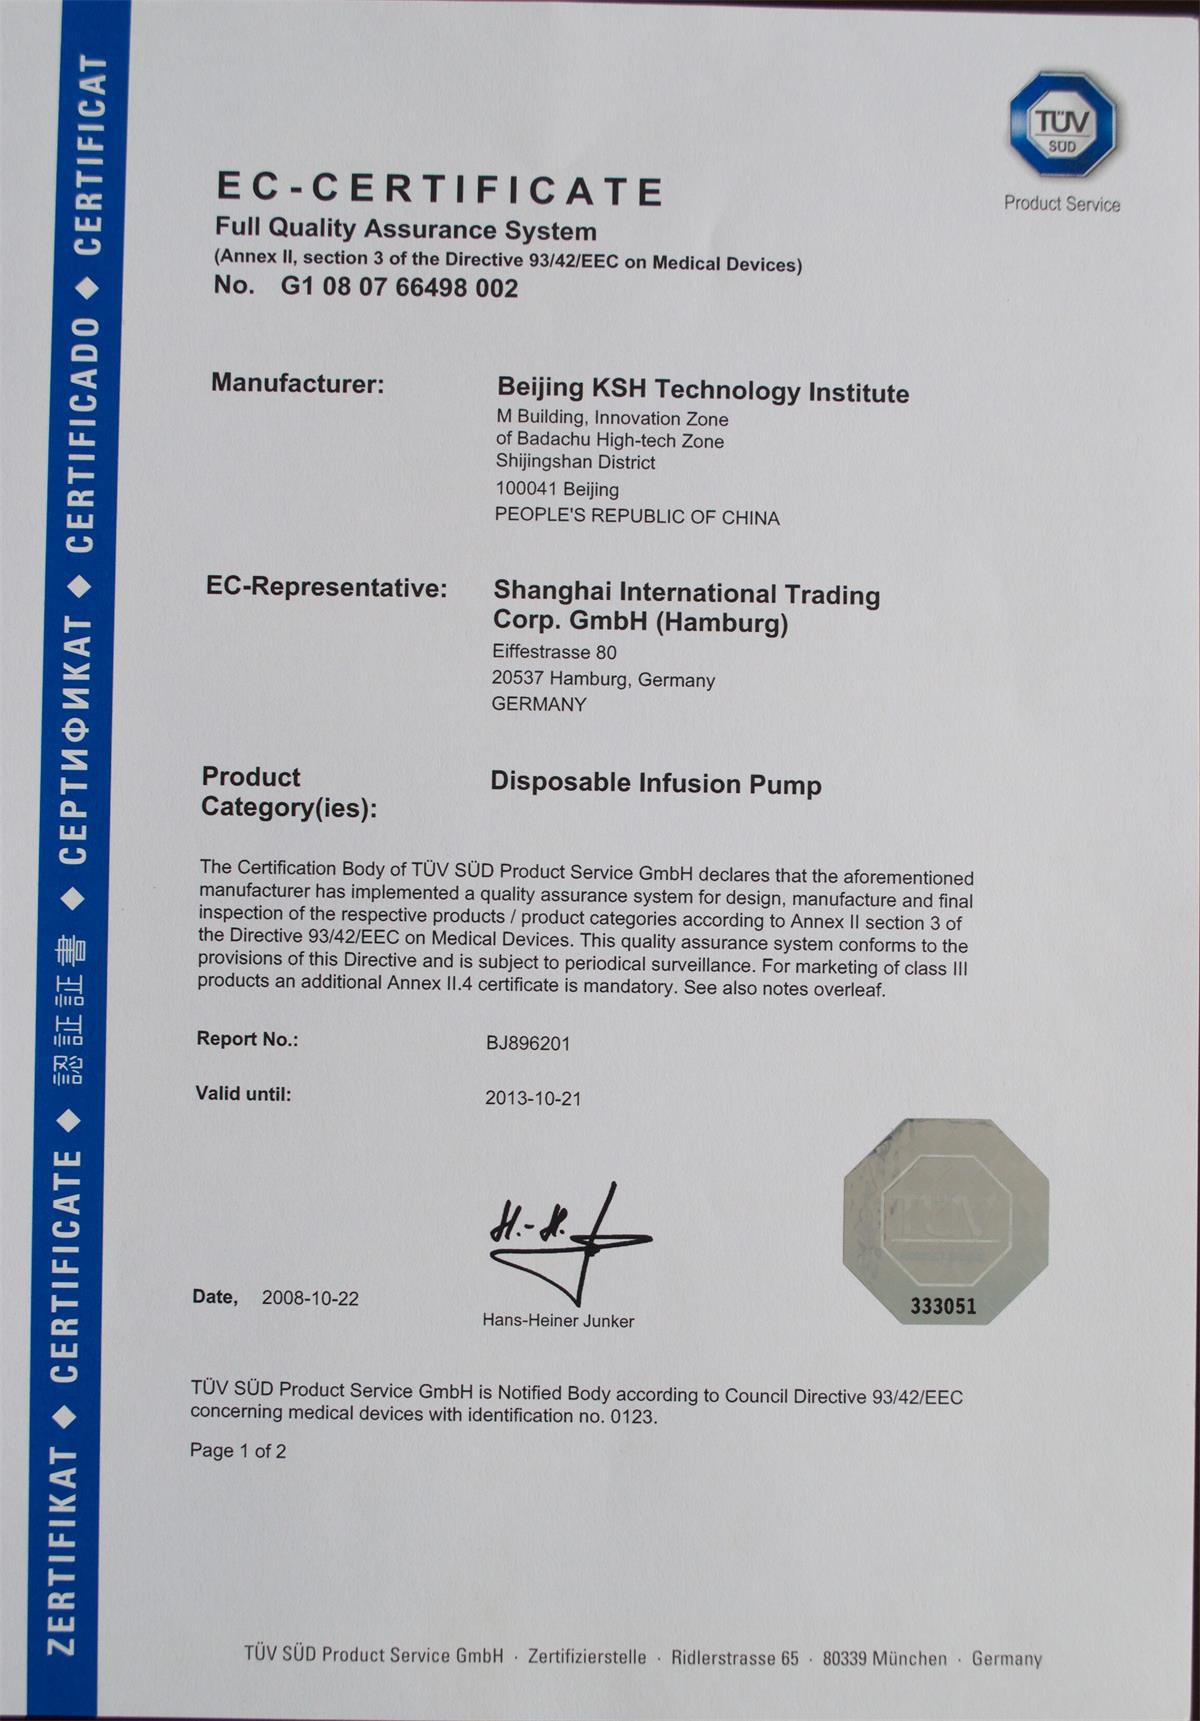 In October 2013, the company's products passed the EU CE certification